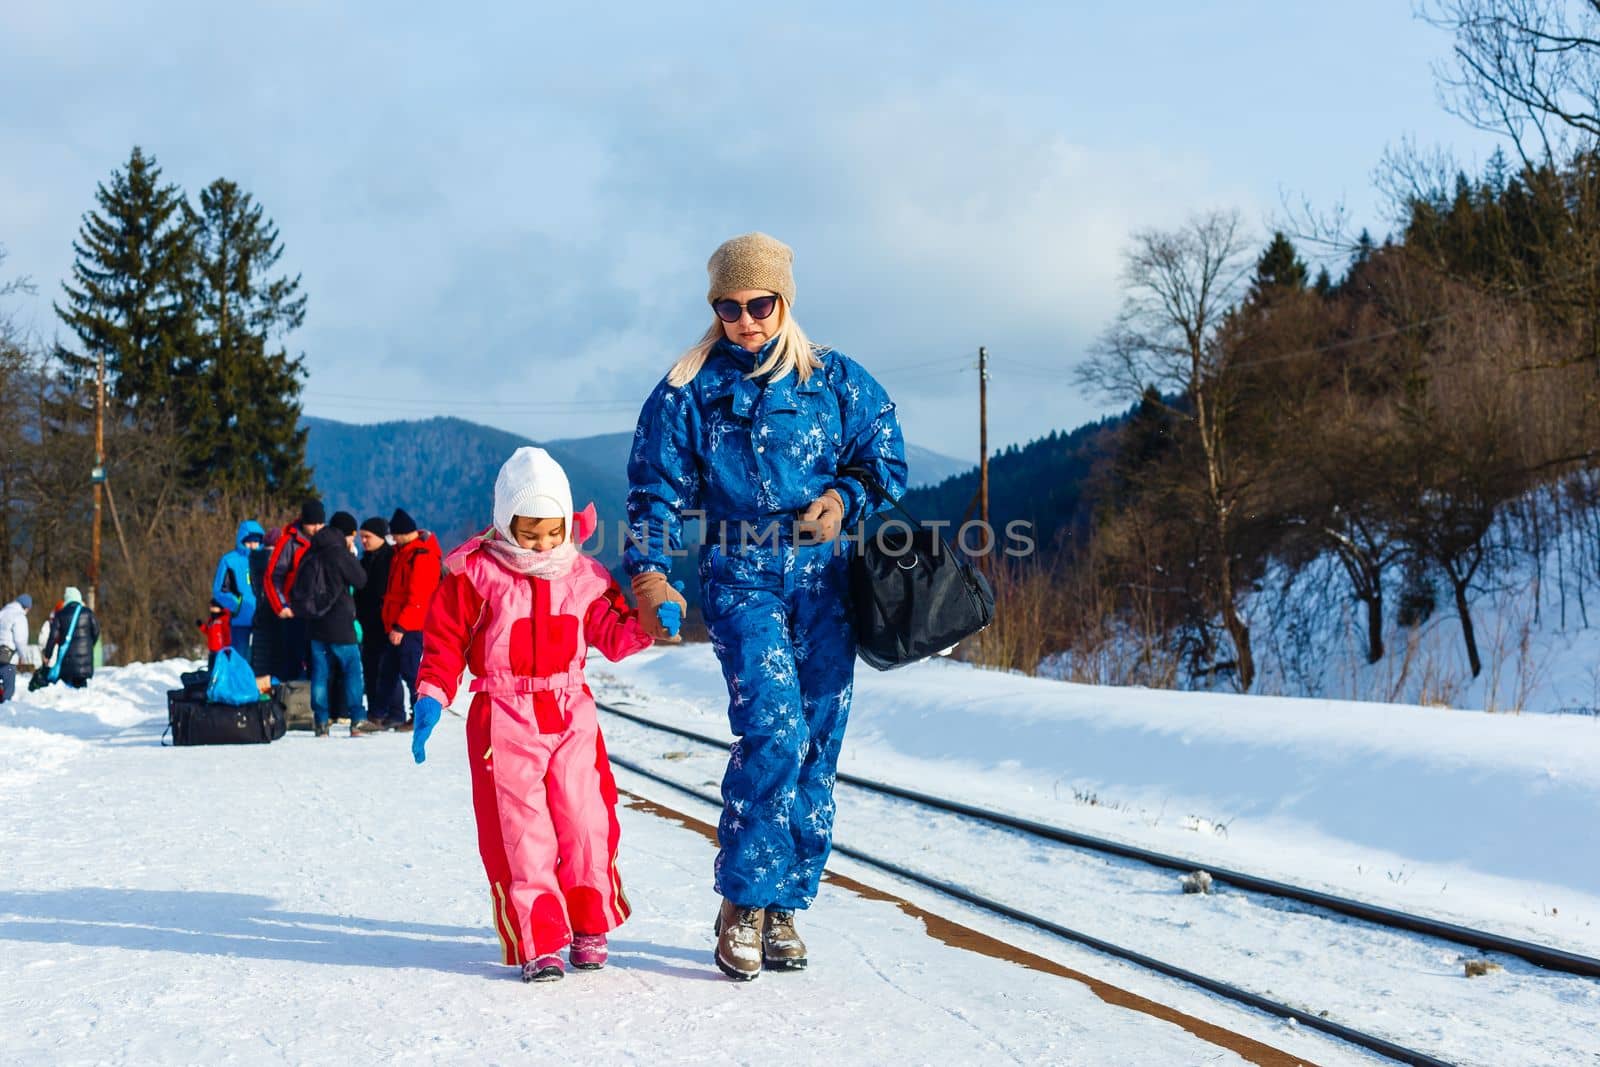 A woman waits with her daughter after heavy snowfall for her train to arrive